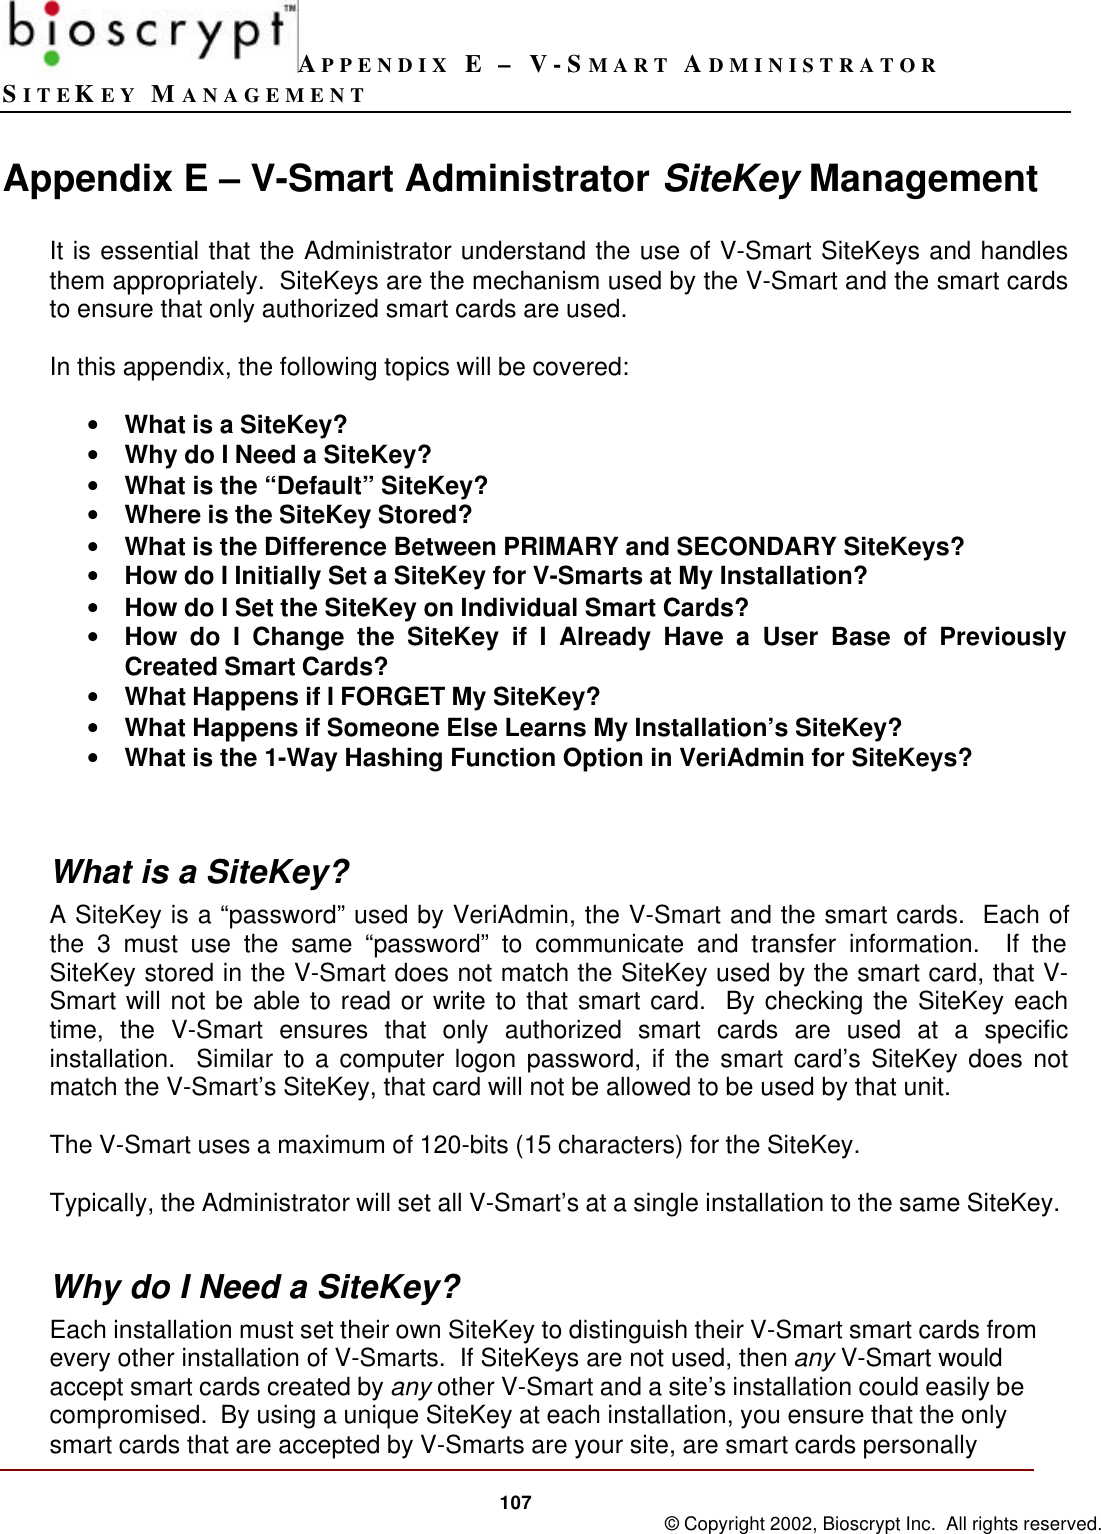 APPENDIX E – V-SMART ADMINISTRATORSITEKEY MANAGEMENT107 © Copyright 2002, Bioscrypt Inc.  All rights reserved.Appendix E – V-Smart Administrator SiteKey ManagementIt is essential that the Administrator understand the use of V-Smart SiteKeys and handlesthem appropriately.  SiteKeys are the mechanism used by the V-Smart and the smart cardsto ensure that only authorized smart cards are used.In this appendix, the following topics will be covered:• What is a SiteKey?• Why do I Need a SiteKey?• What is the “Default” SiteKey?• Where is the SiteKey Stored?• What is the Difference Between PRIMARY and SECONDARY SiteKeys?• How do I Initially Set a SiteKey for V-Smarts at My Installation?• How do I Set the SiteKey on Individual Smart Cards?• How do I Change the SiteKey if I Already Have a User Base of PreviouslyCreated Smart Cards?• What Happens if I FORGET My SiteKey?• What Happens if Someone Else Learns My Installation’s SiteKey?• What is the 1-Way Hashing Function Option in VeriAdmin for SiteKeys?What is a SiteKey?A SiteKey is a “password” used by VeriAdmin, the V-Smart and the smart cards.  Each ofthe 3 must use the same “password” to communicate and transfer information.  If theSiteKey stored in the V-Smart does not match the SiteKey used by the smart card, that V-Smart will not be able to read or write to that smart card.  By checking the SiteKey eachtime, the V-Smart ensures that only authorized smart cards are used at a specificinstallation.  Similar to a computer logon password, if the smart card’s SiteKey does notmatch the V-Smart’s SiteKey, that card will not be allowed to be used by that unit.The V-Smart uses a maximum of 120-bits (15 characters) for the SiteKey.Typically, the Administrator will set all V-Smart’s at a single installation to the same SiteKey.Why do I Need a SiteKey?Each installation must set their own SiteKey to distinguish their V-Smart smart cards fromevery other installation of V-Smarts.  If SiteKeys are not used, then any V-Smart wouldaccept smart cards created by any other V-Smart and a site’s installation could easily becompromised.  By using a unique SiteKey at each installation, you ensure that the onlysmart cards that are accepted by V-Smarts are your site, are smart cards personally